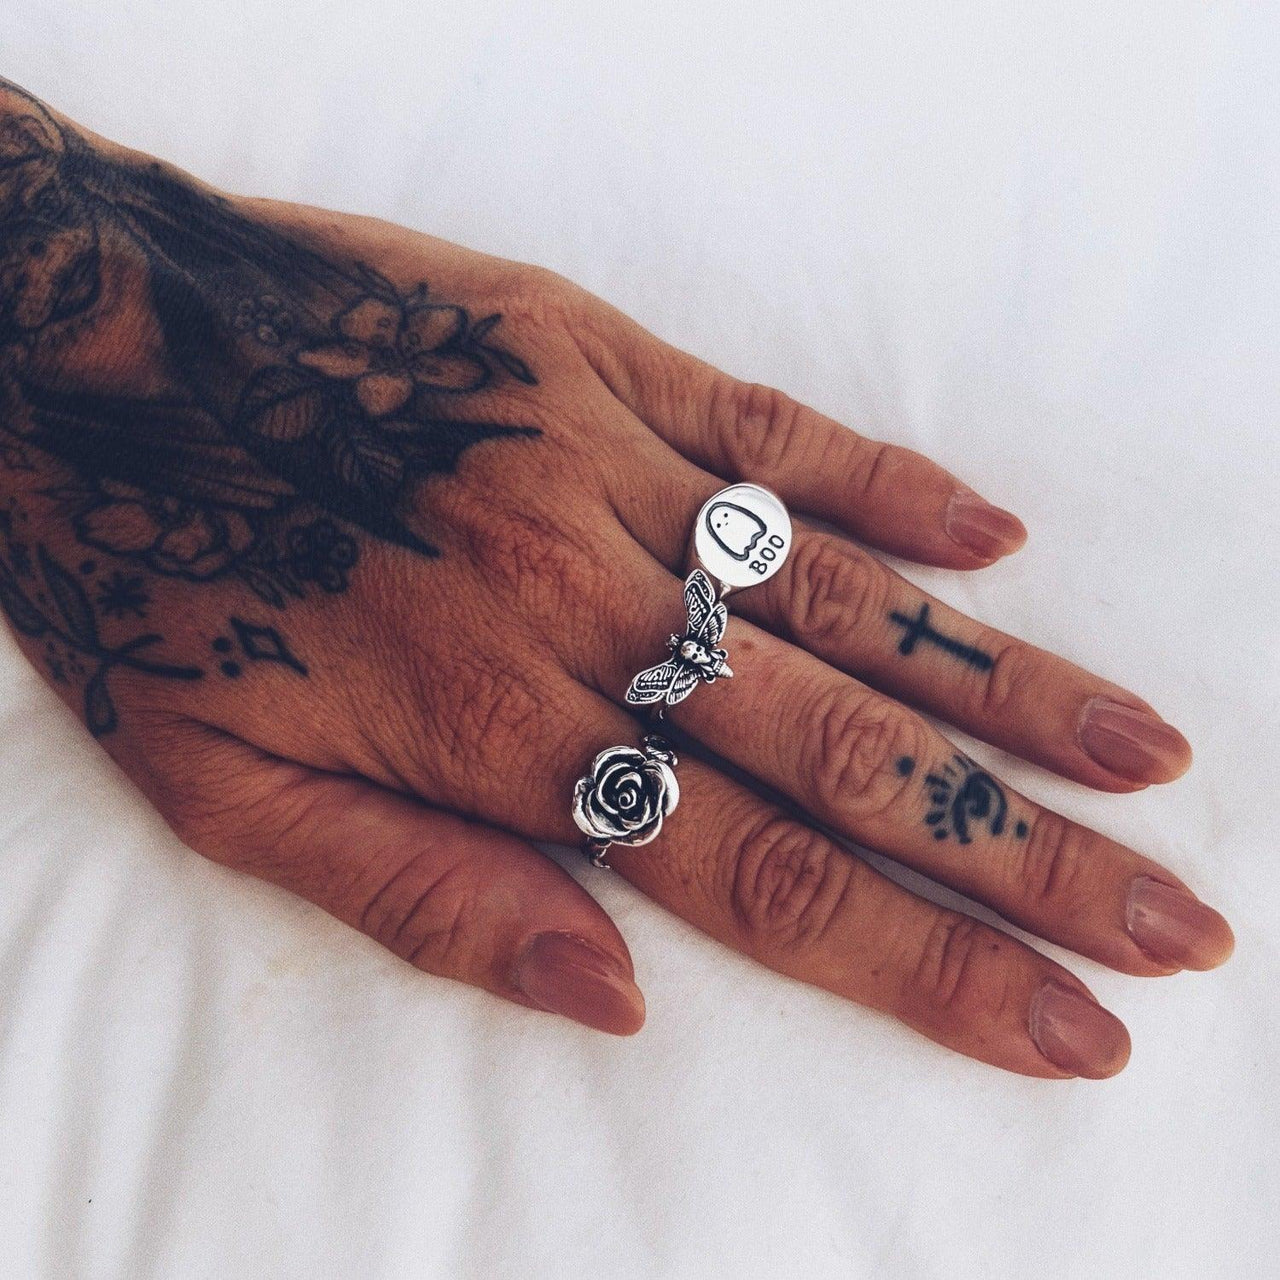 Enchanted Rose, Death's Head, Boo Signet rings by Black Feather Design